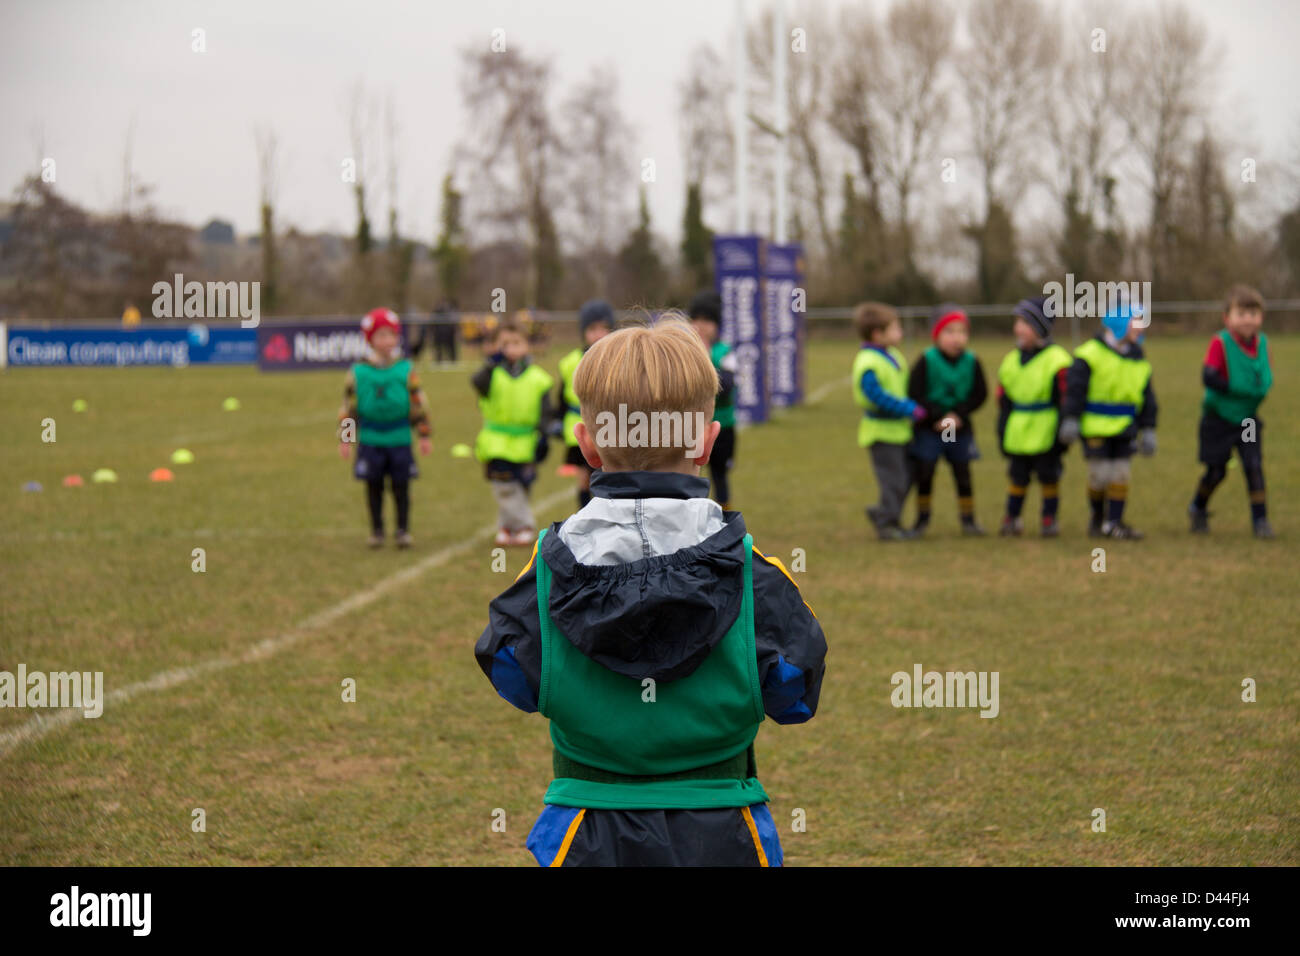 A young boy waiting to confront the challenge of running past a wall of other children to win his rugby competition Stock Photo